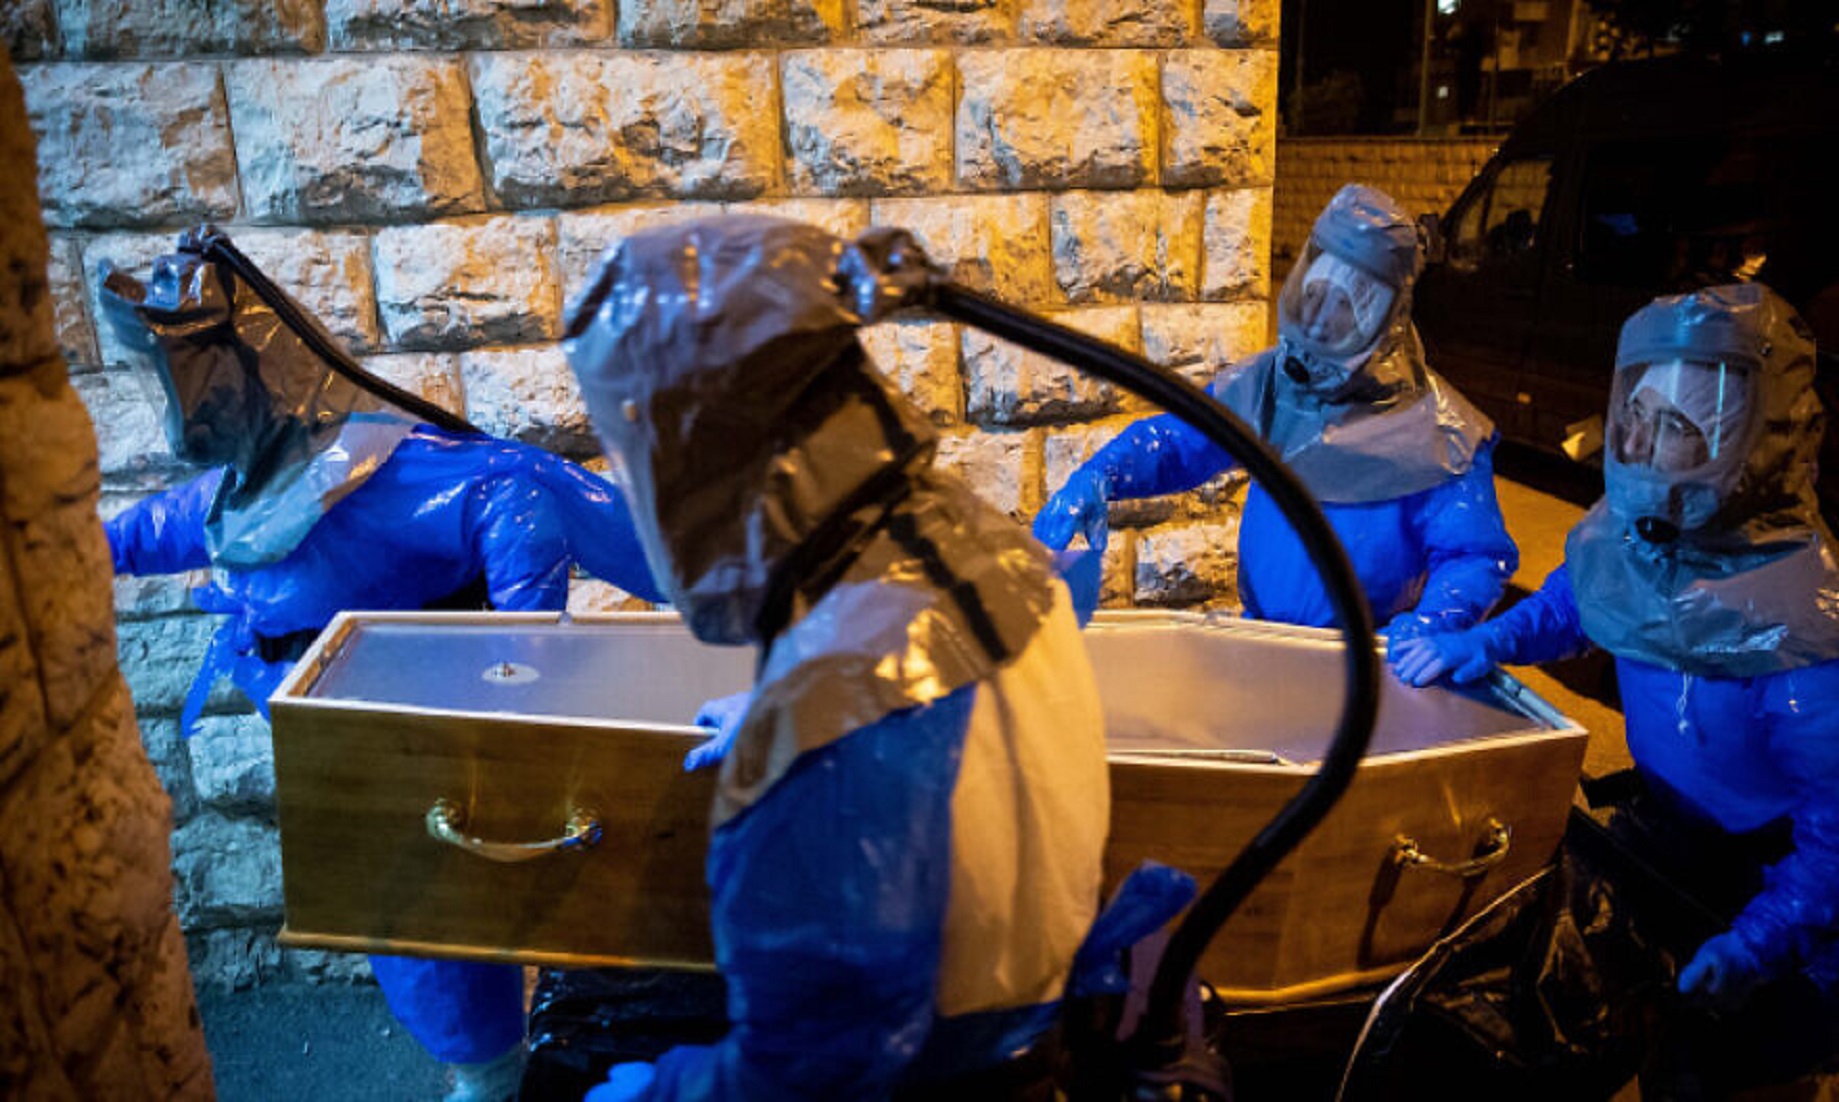 COVID-19 Death Toll Rises To 73 In Israel